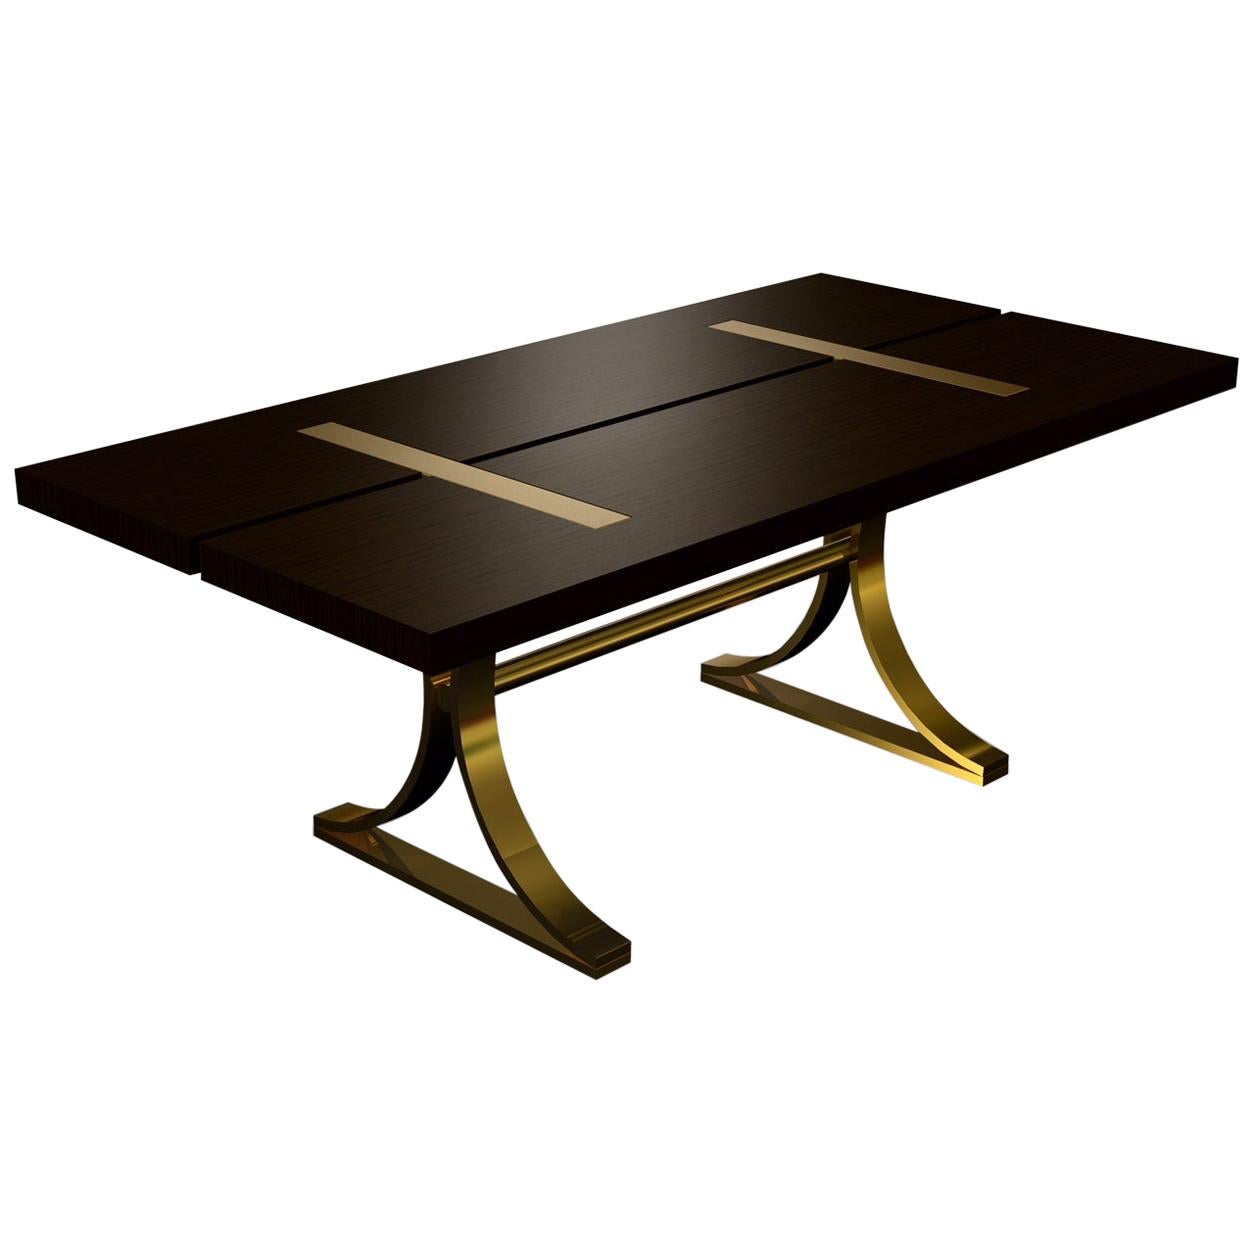 Art Deco Inspired Vesta Dining Table in Antique Brass Tint  &Wood Veneer Surface For Sale